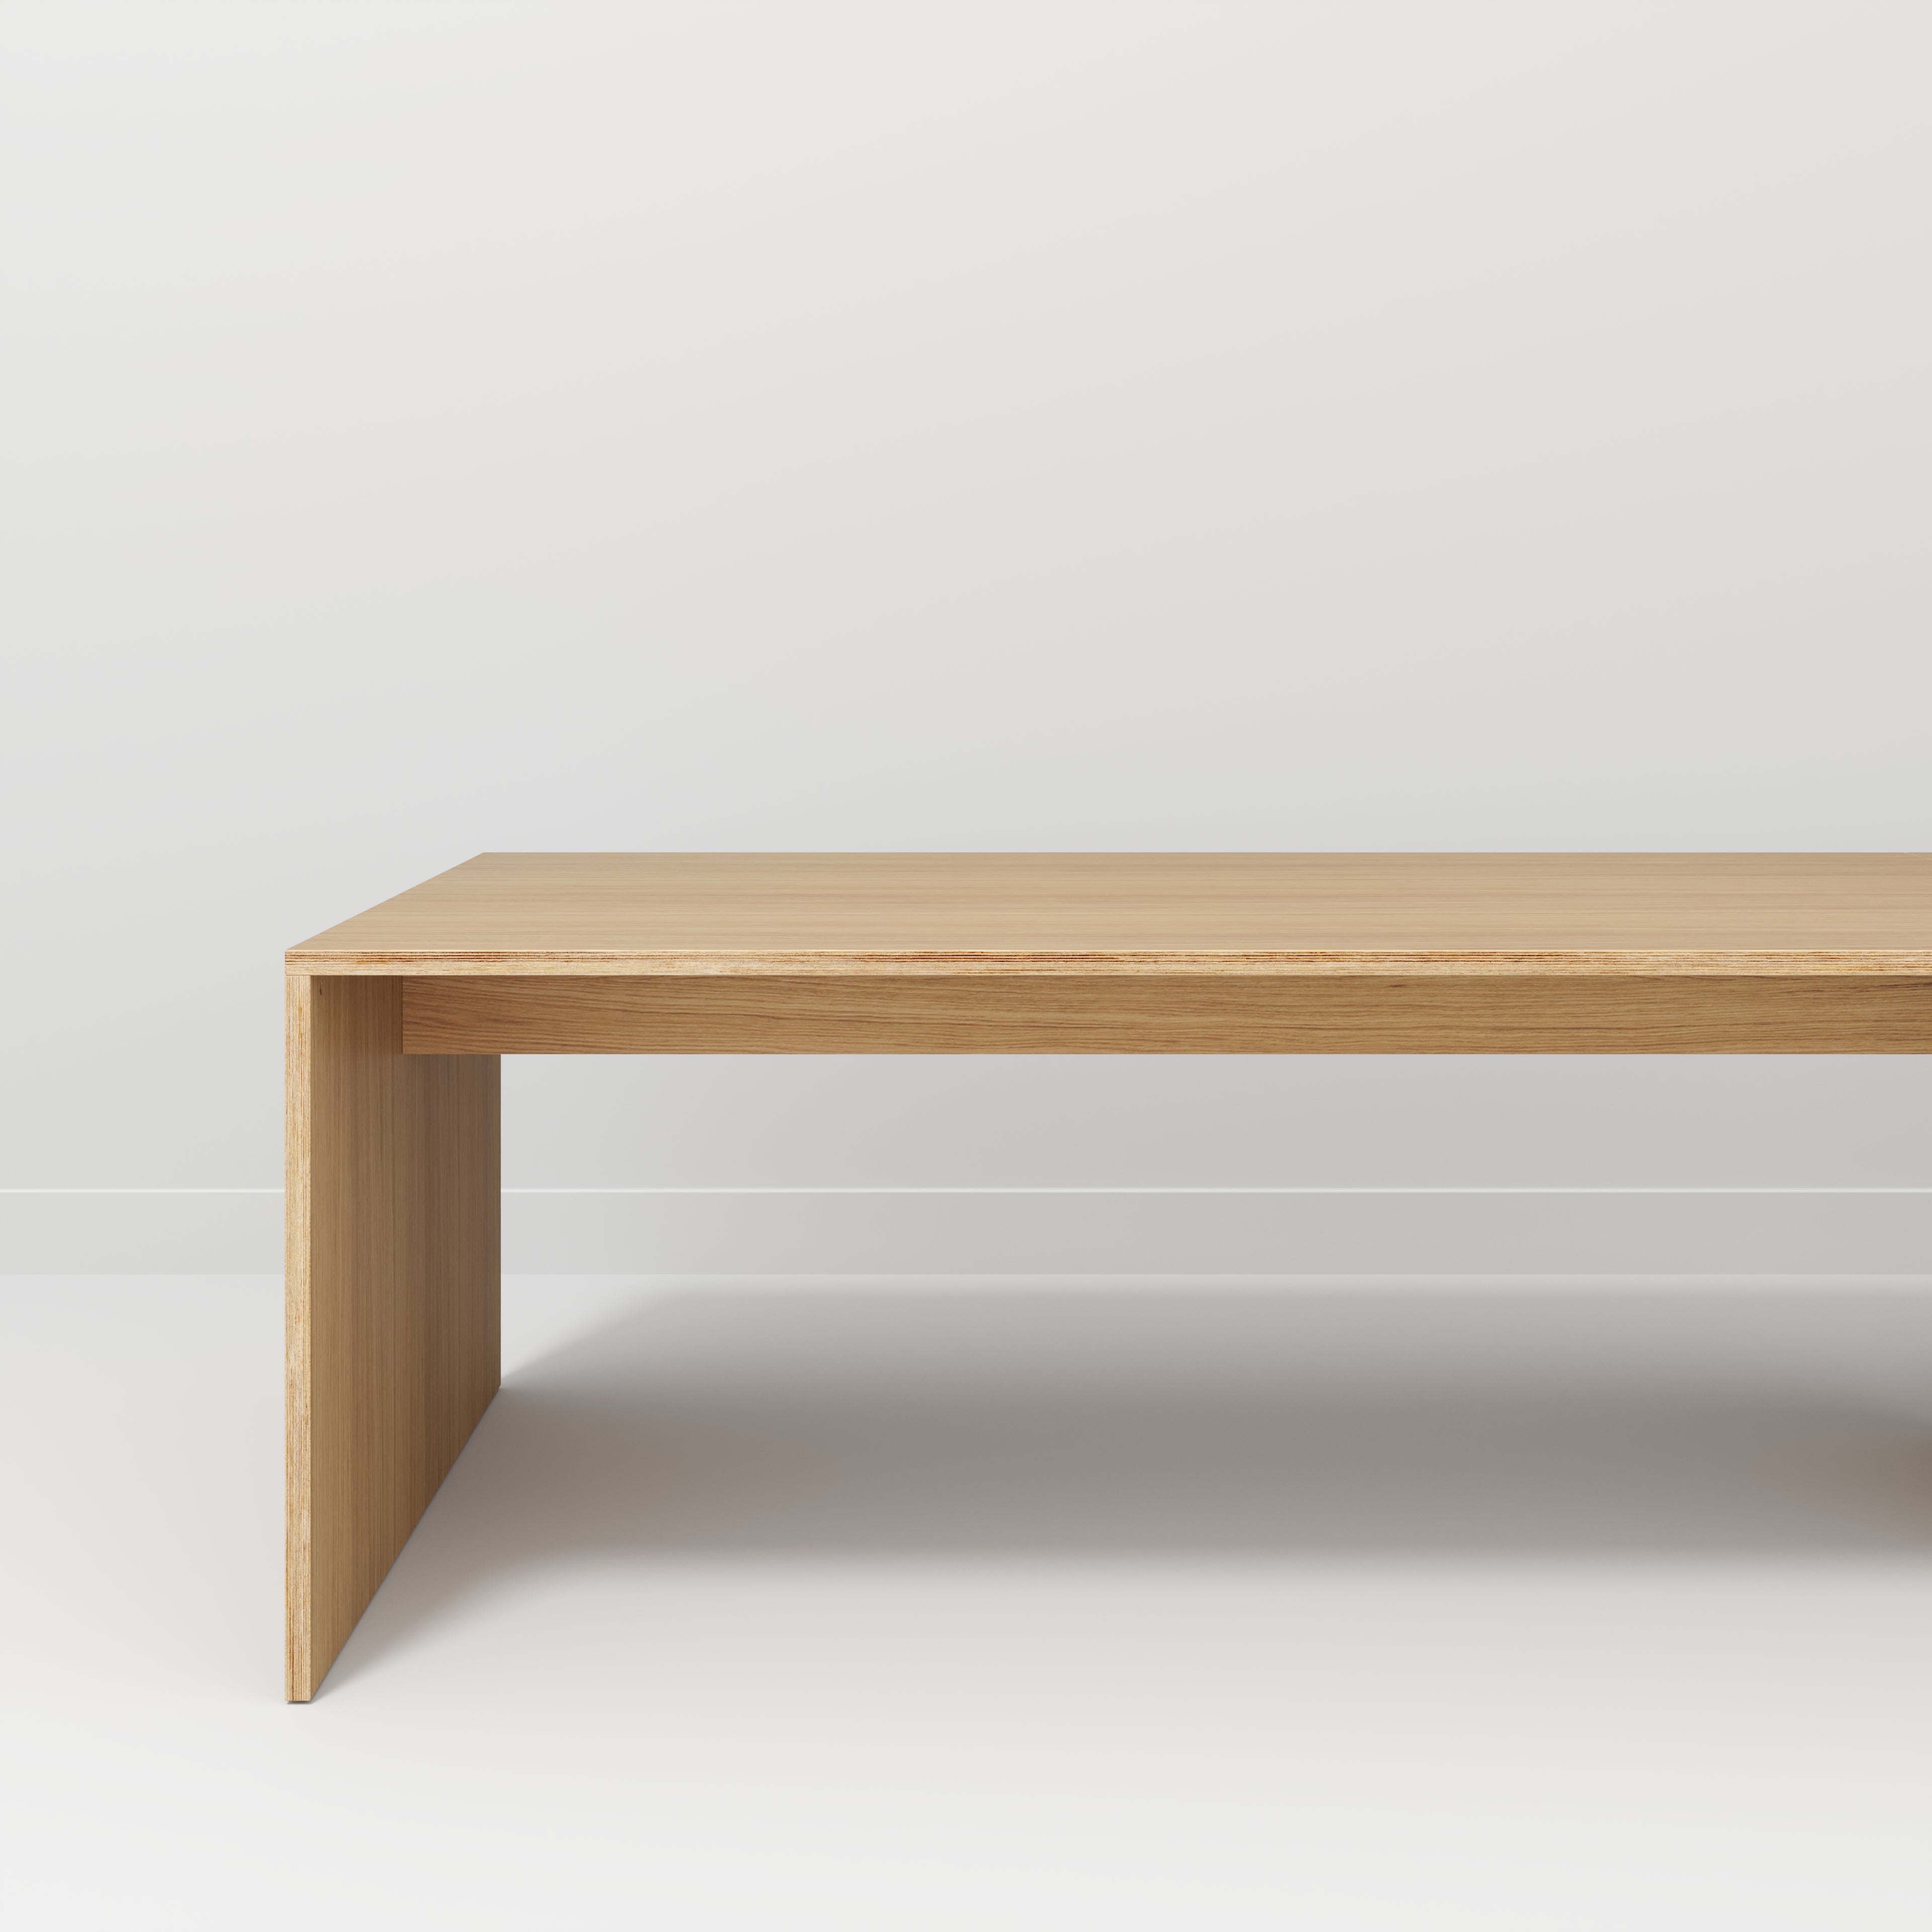 Table with Solid Sides - Plywood Oak - 4000(w) x 1000(d) x 750(h)